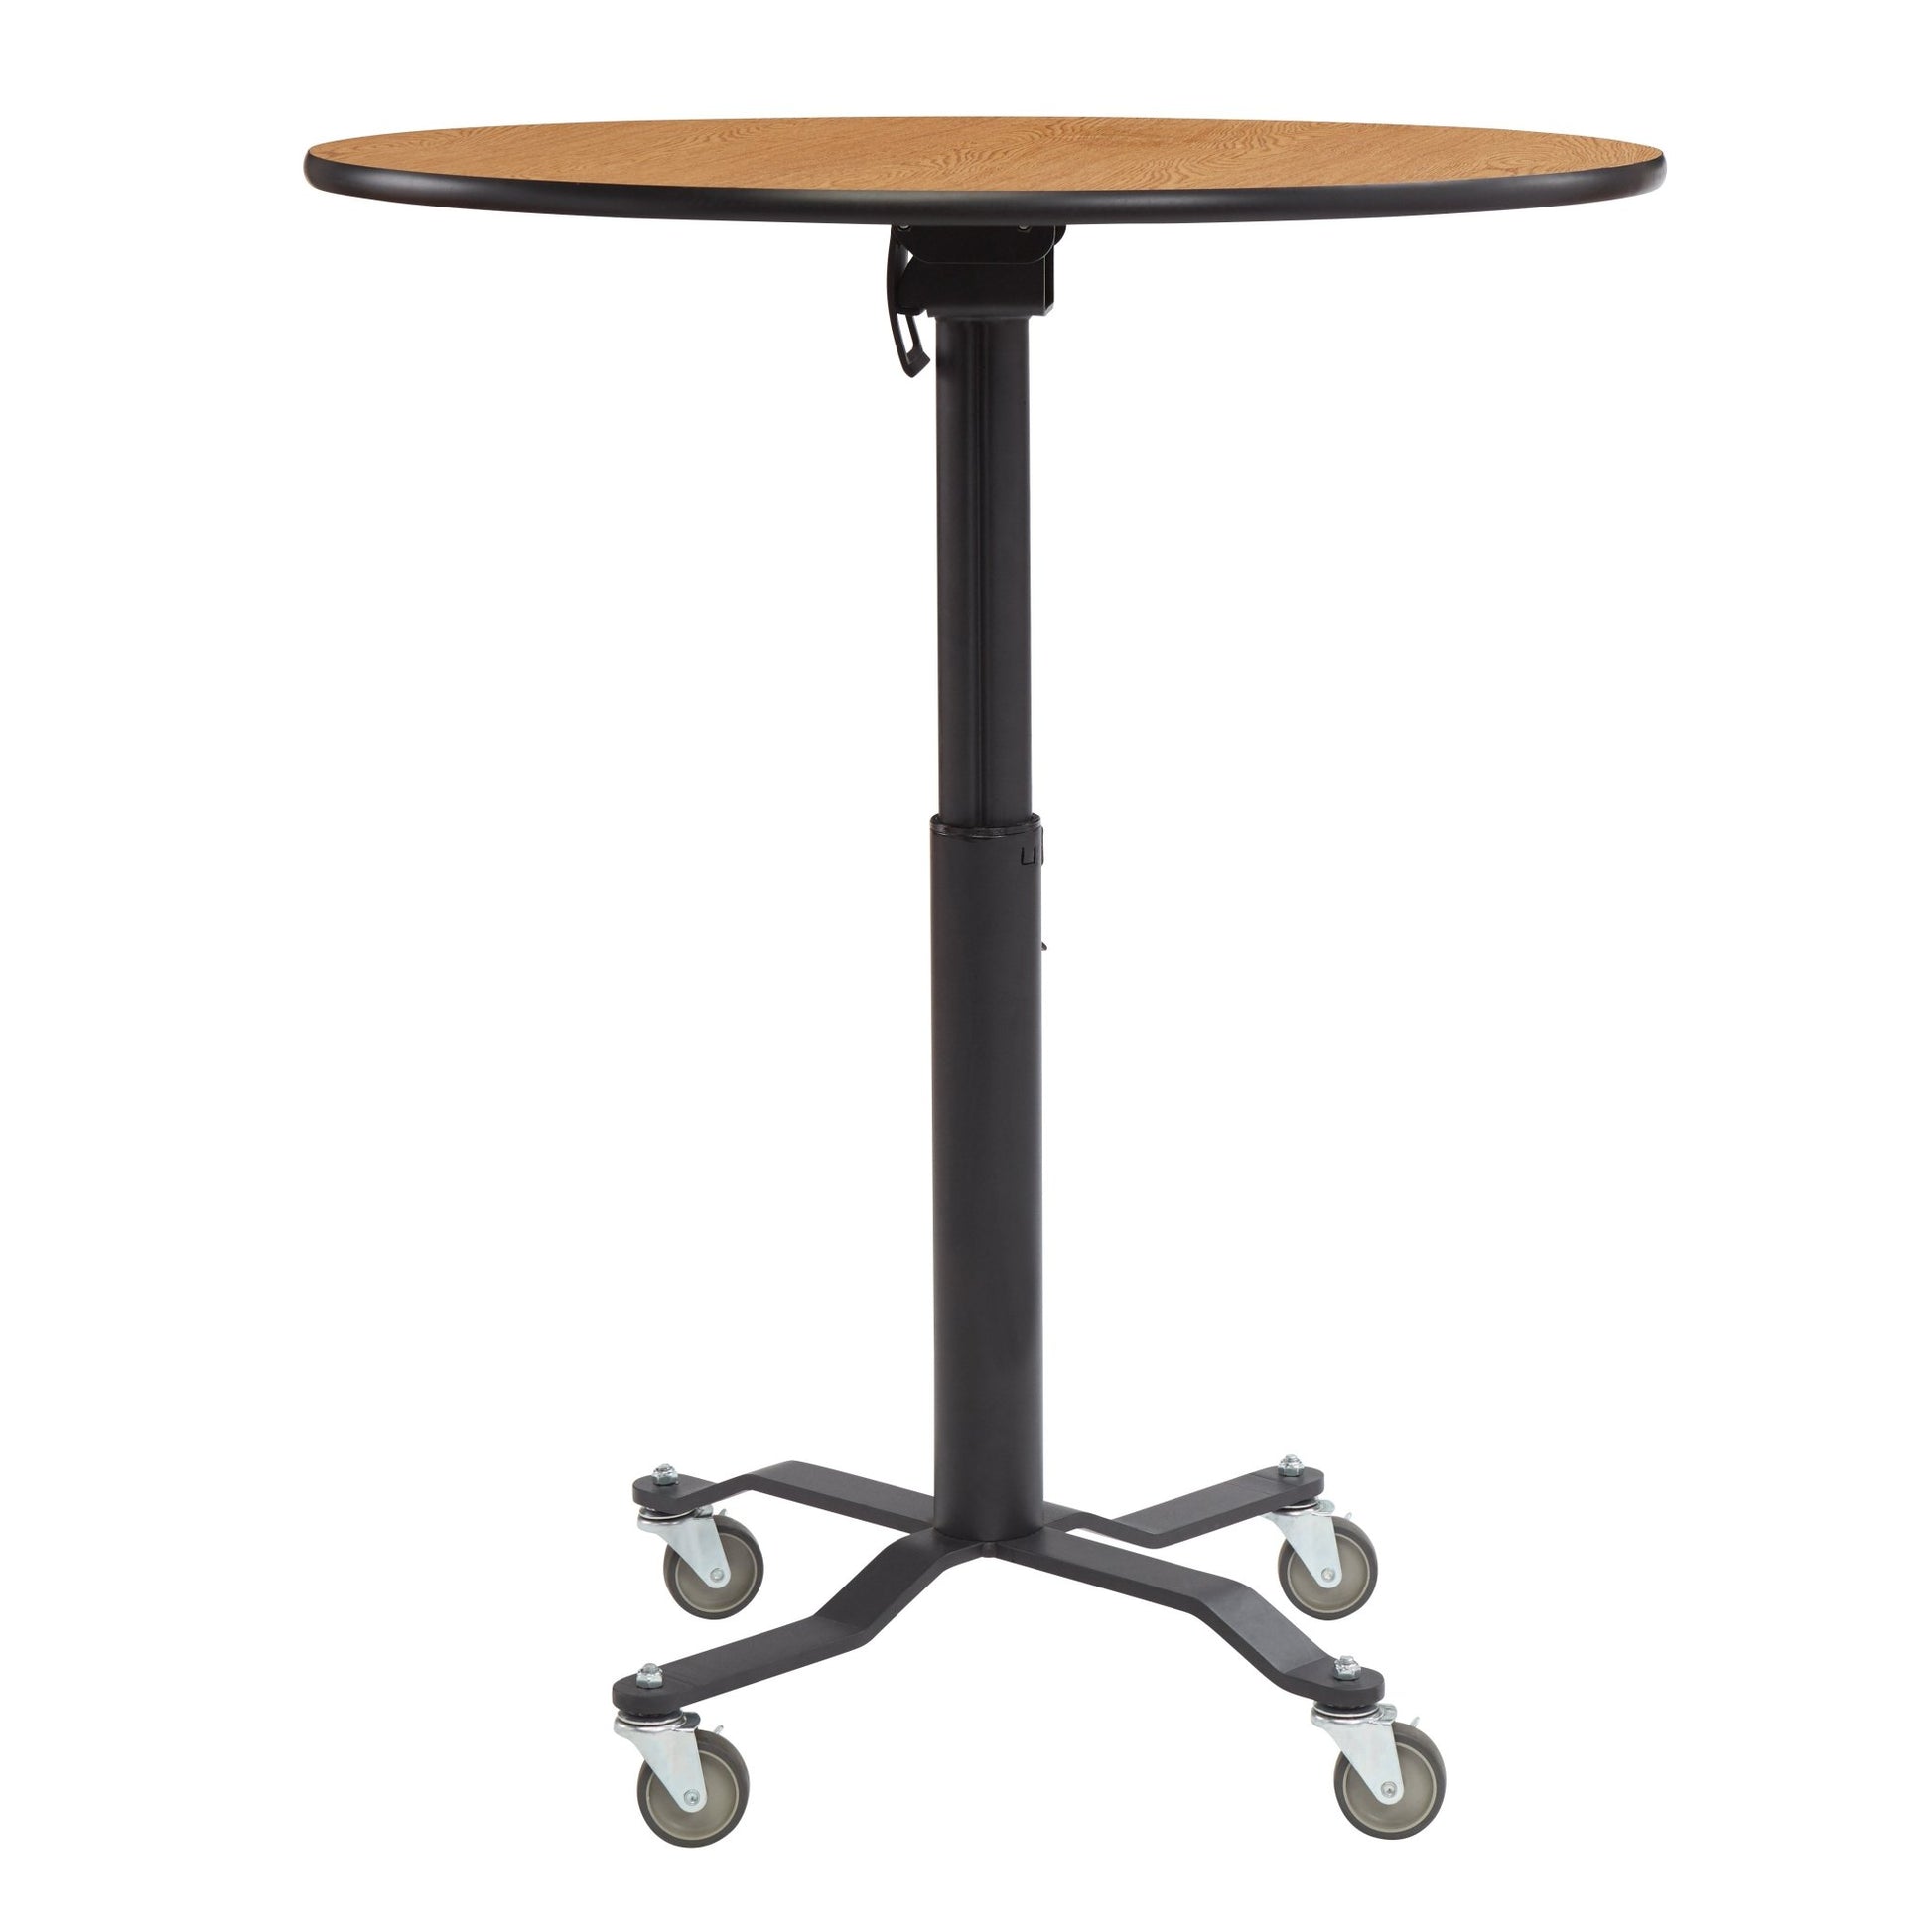 NPS Cafe Time II Table, 24" Round, High Pressure Laminate Top, MDF Core, ProtectEdge (NationalPublic Seating NPS-PCT124MDPE) - SchoolOutlet